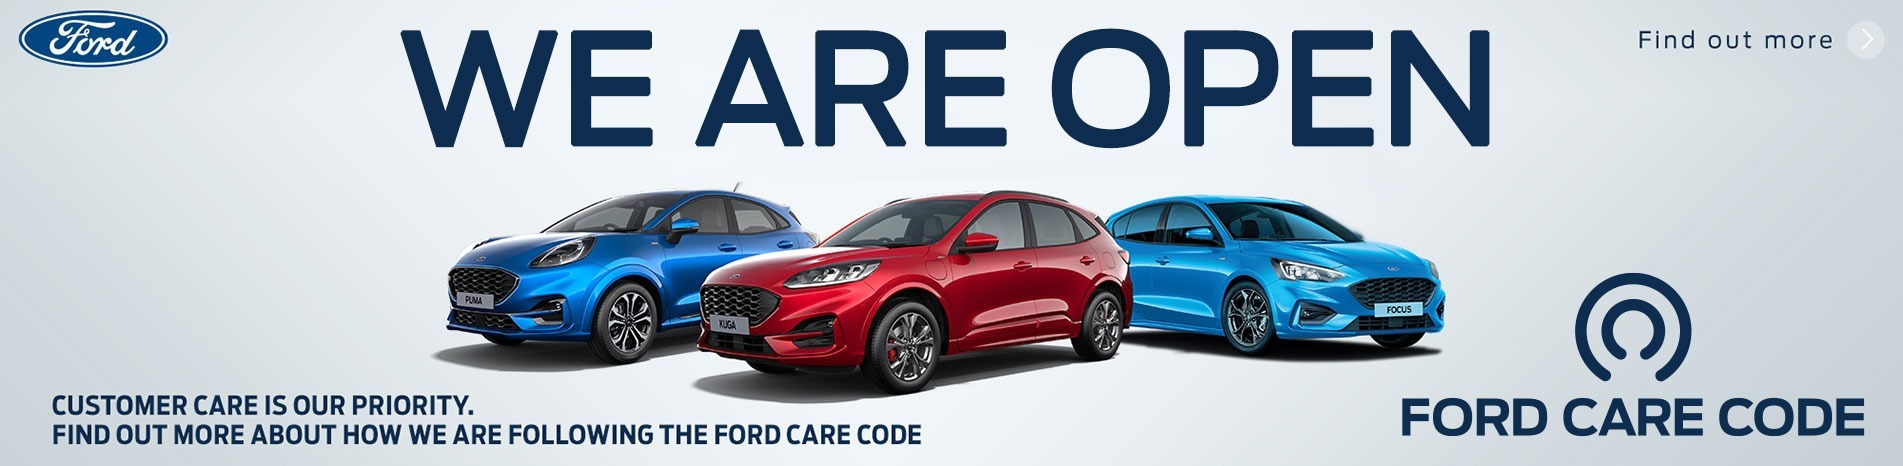 Ford Care Code at Glenford